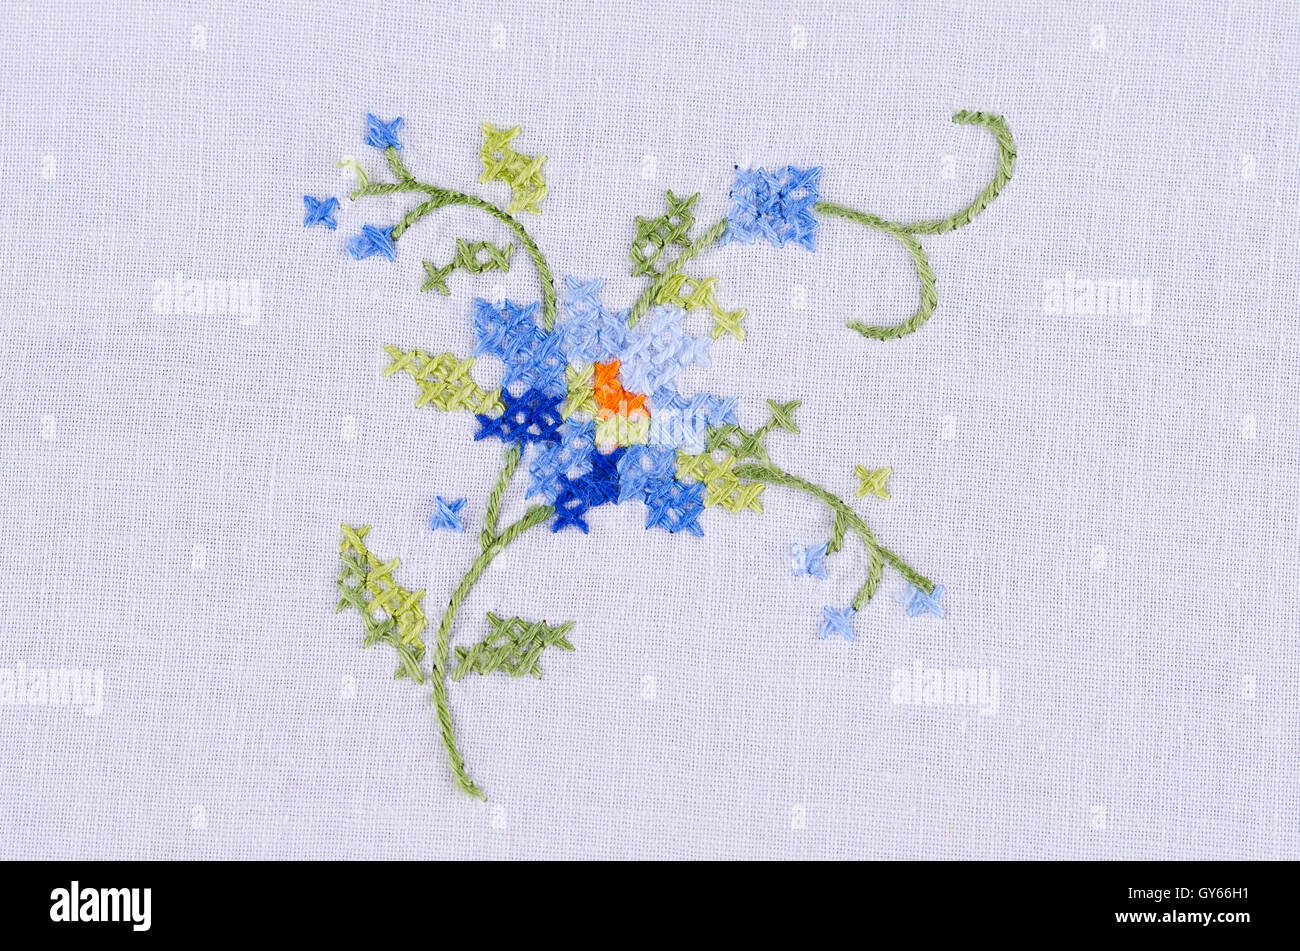 Blue flower motif hand embroidery on white linen tablecloth.  Multicolored cross stich decoration with yarn. Handicraft. Stock Photo